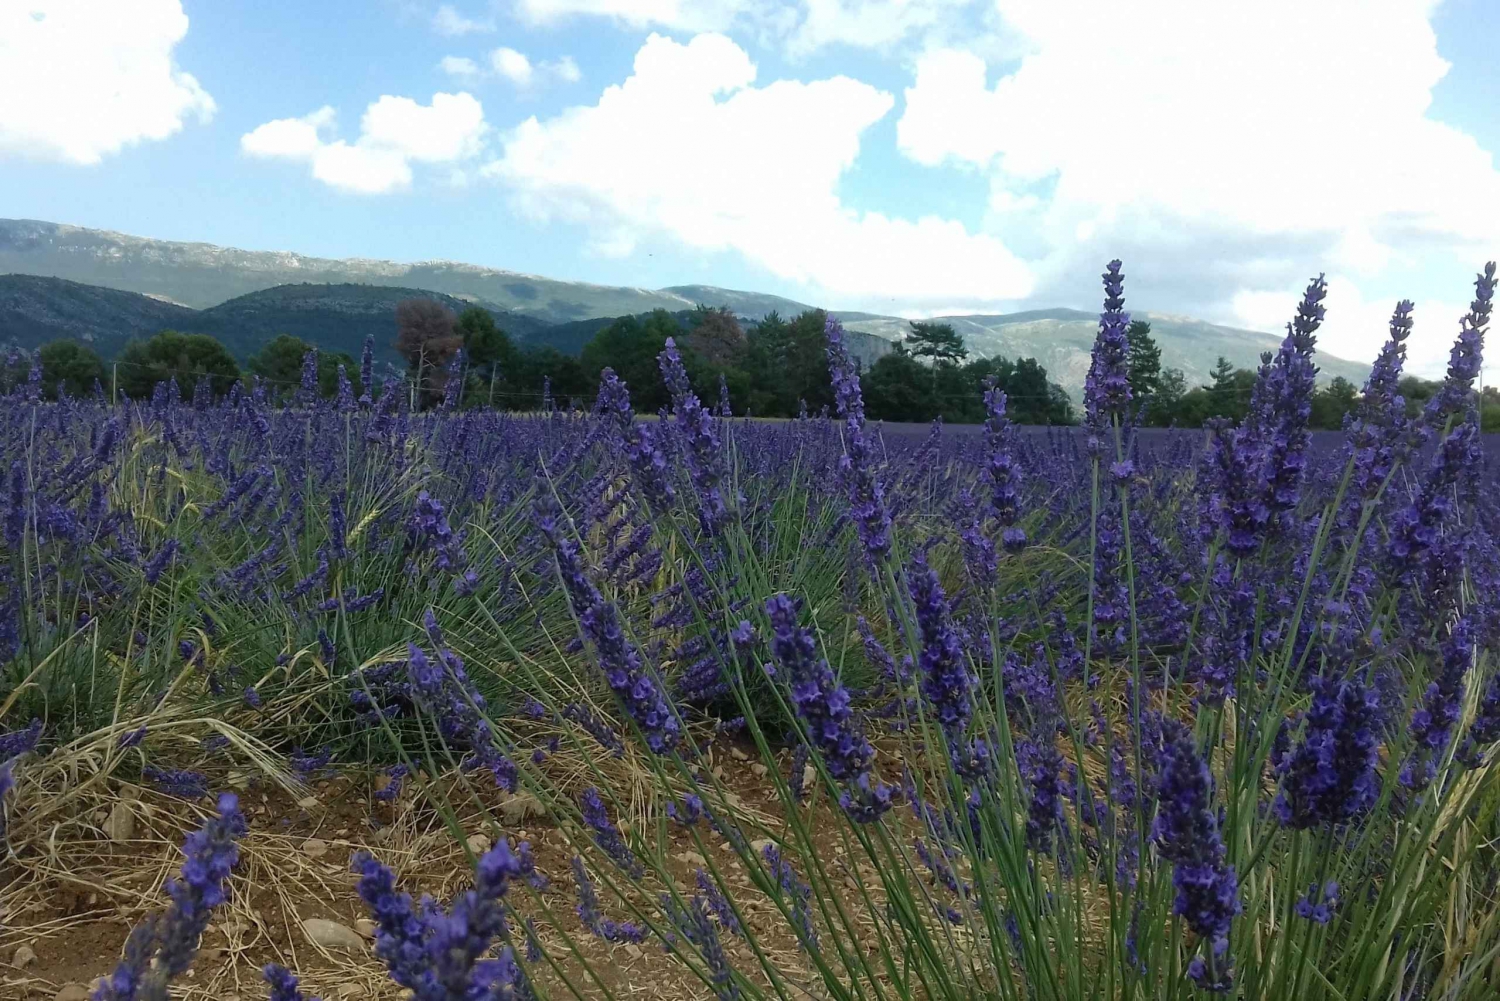 From Nice: The Grand Canyon of Europe & its Lavender Fields